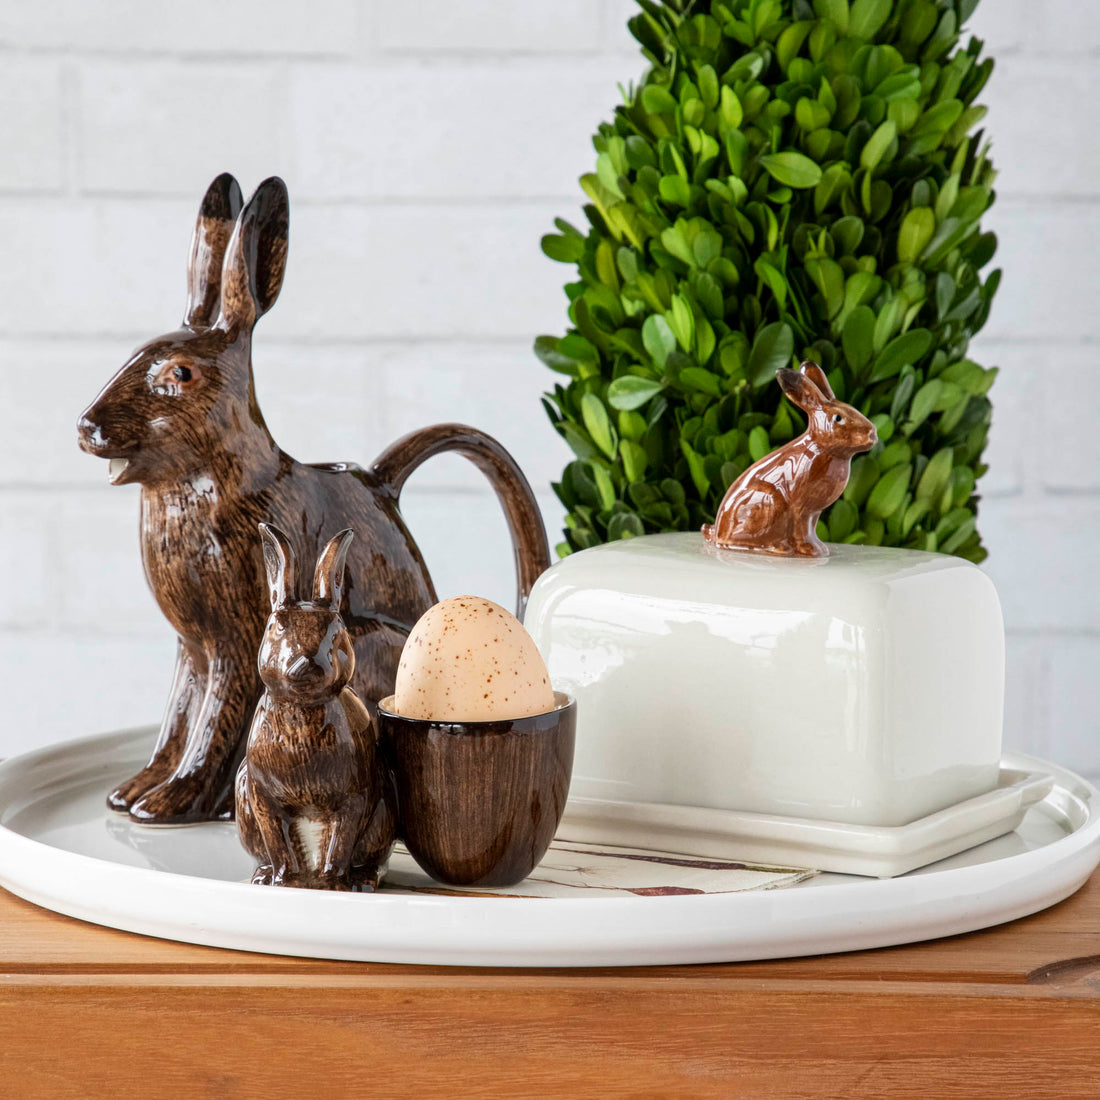 A hand-painted tray with two rabbits and an egg on it by British brand Hare Ceramics.